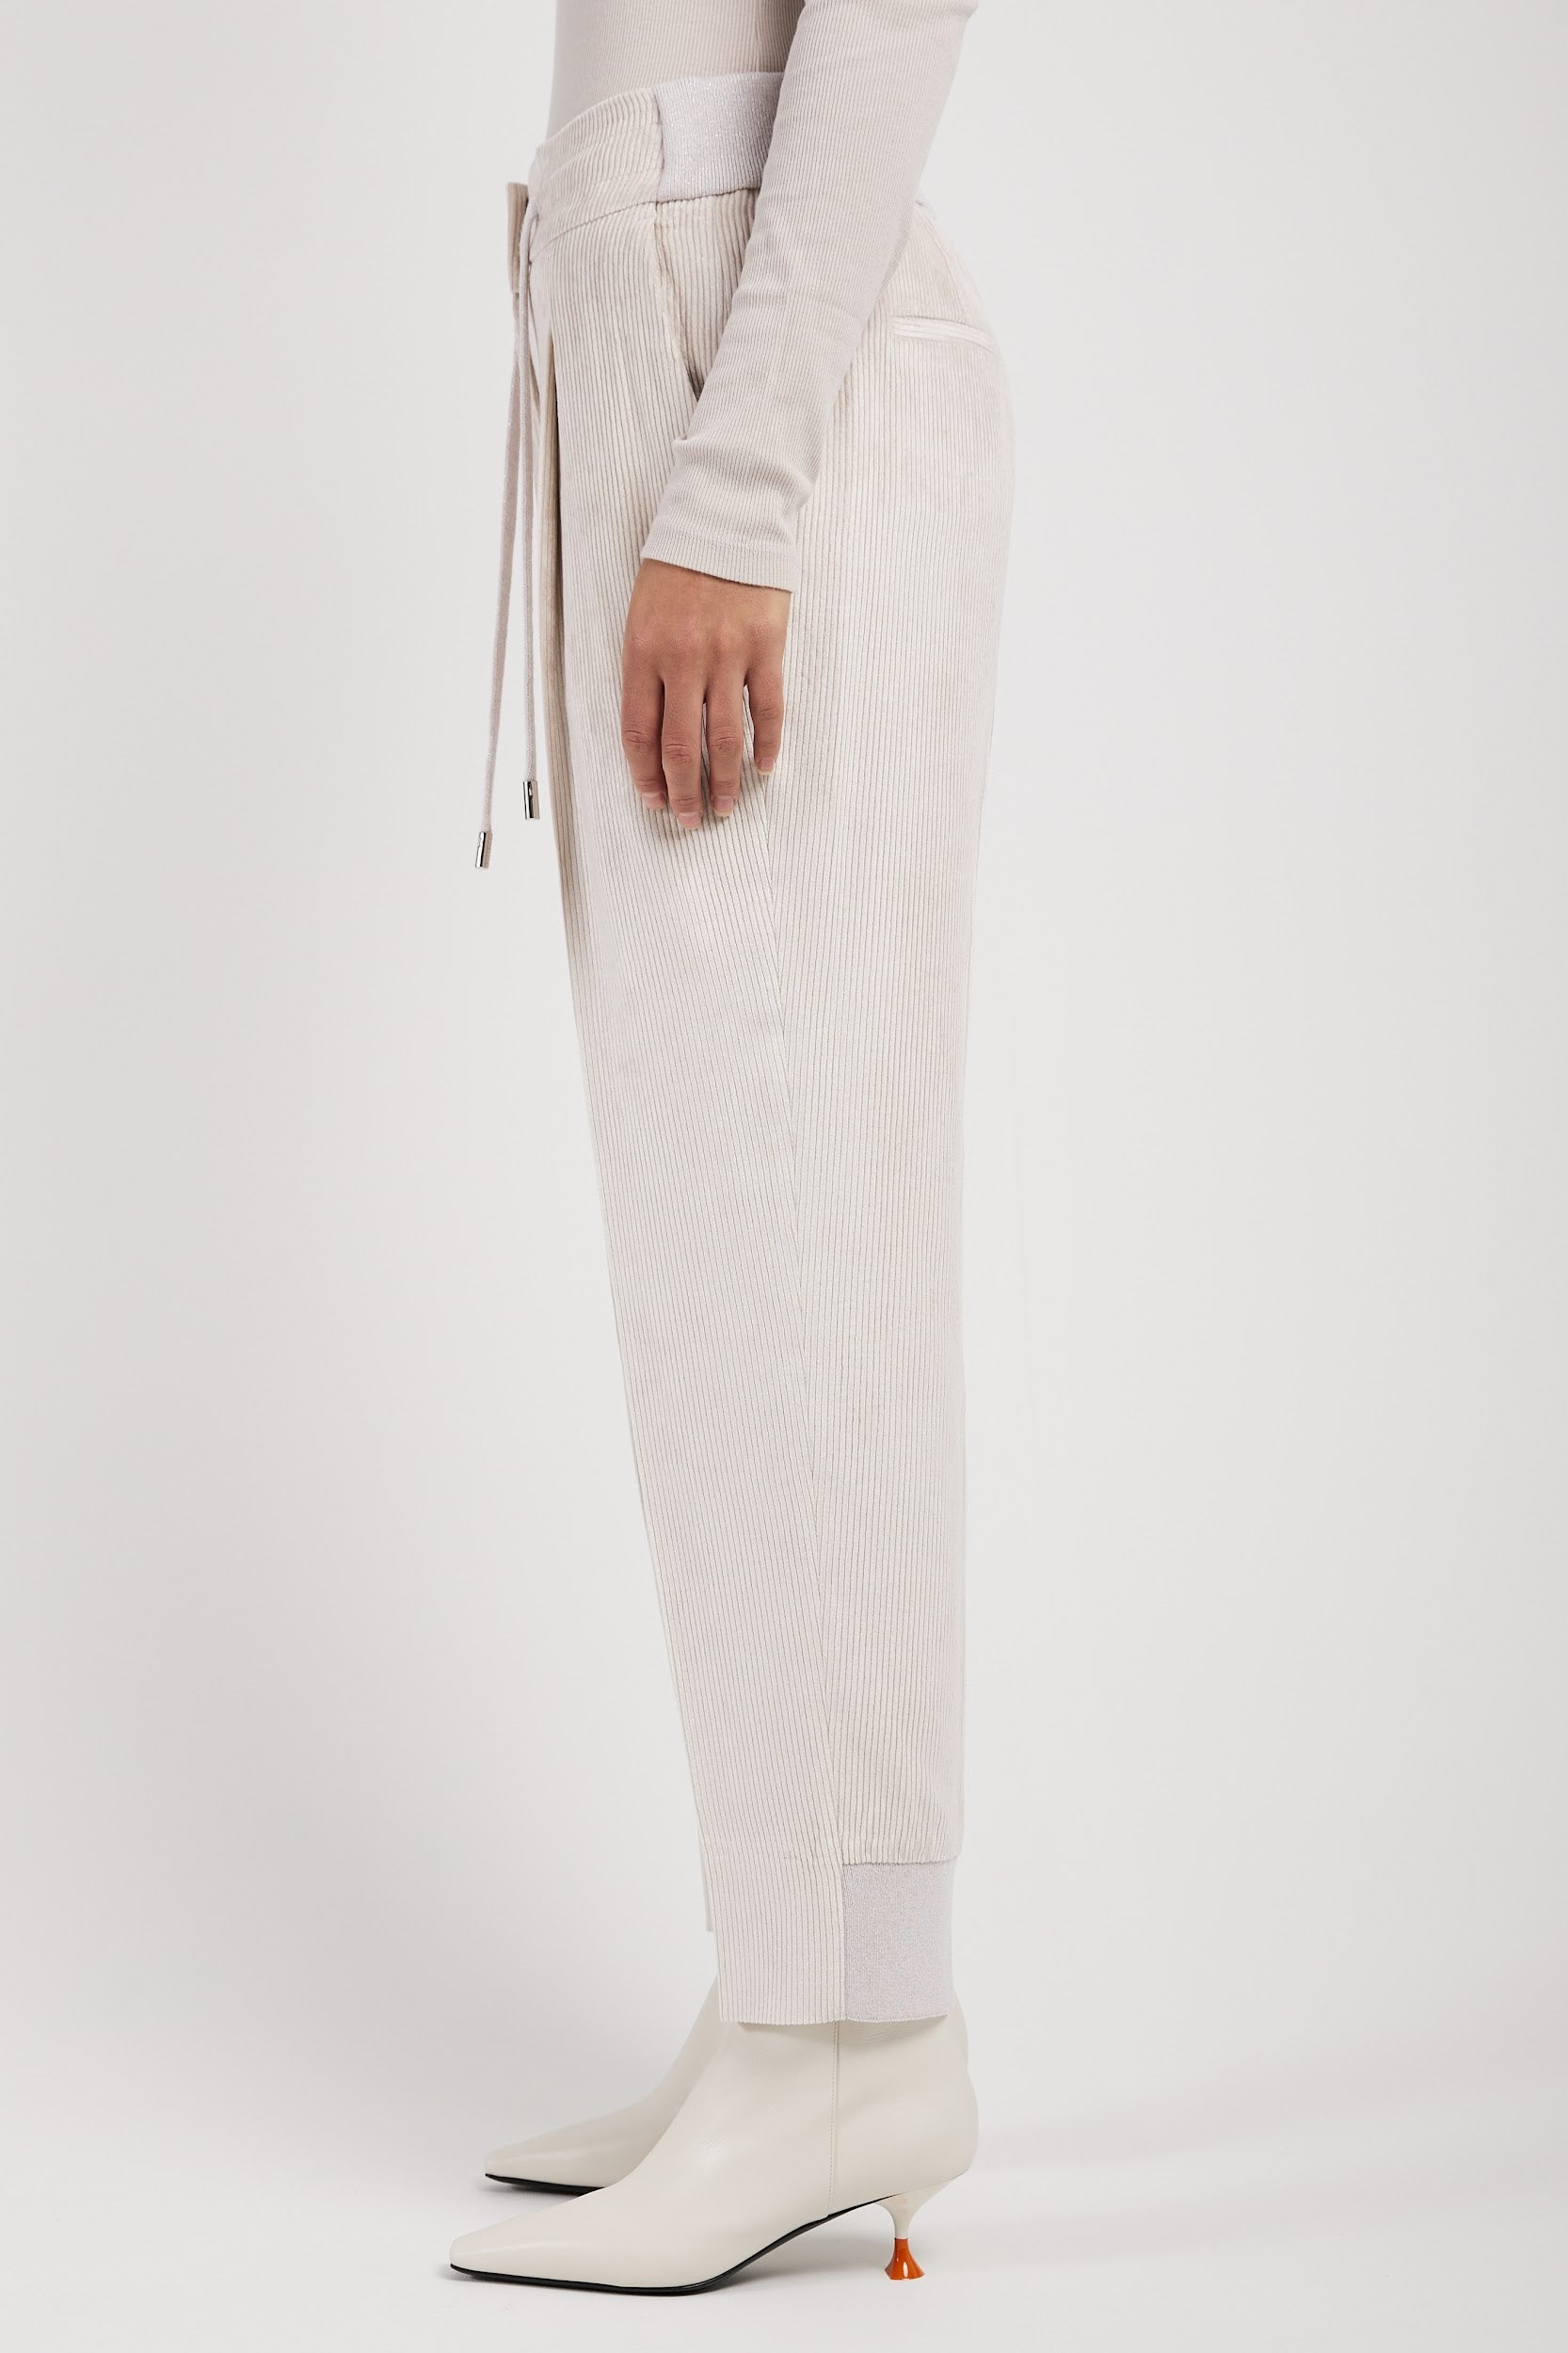 PESERICO Drawstring Corduroy Tricot Pant in Marble Dust